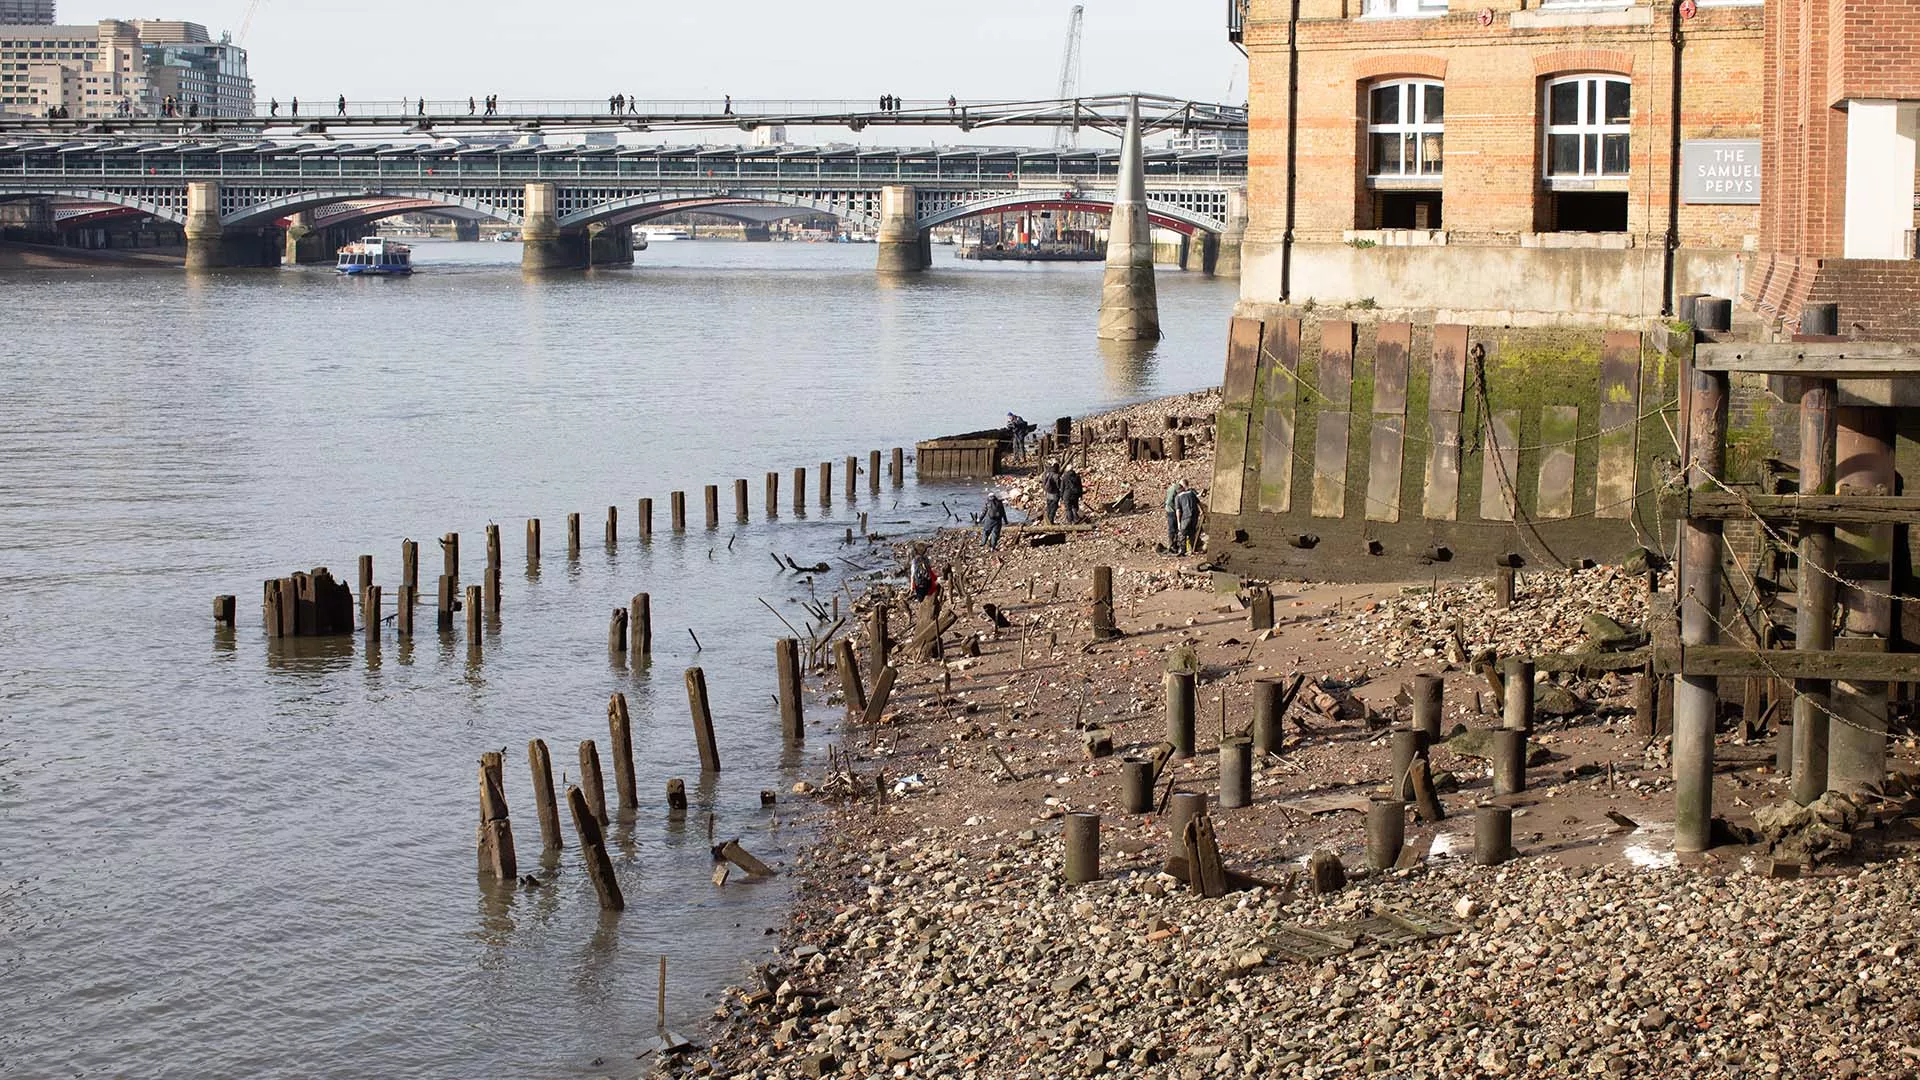 Mudlarks on the River Thames foreshore near Queenhithe